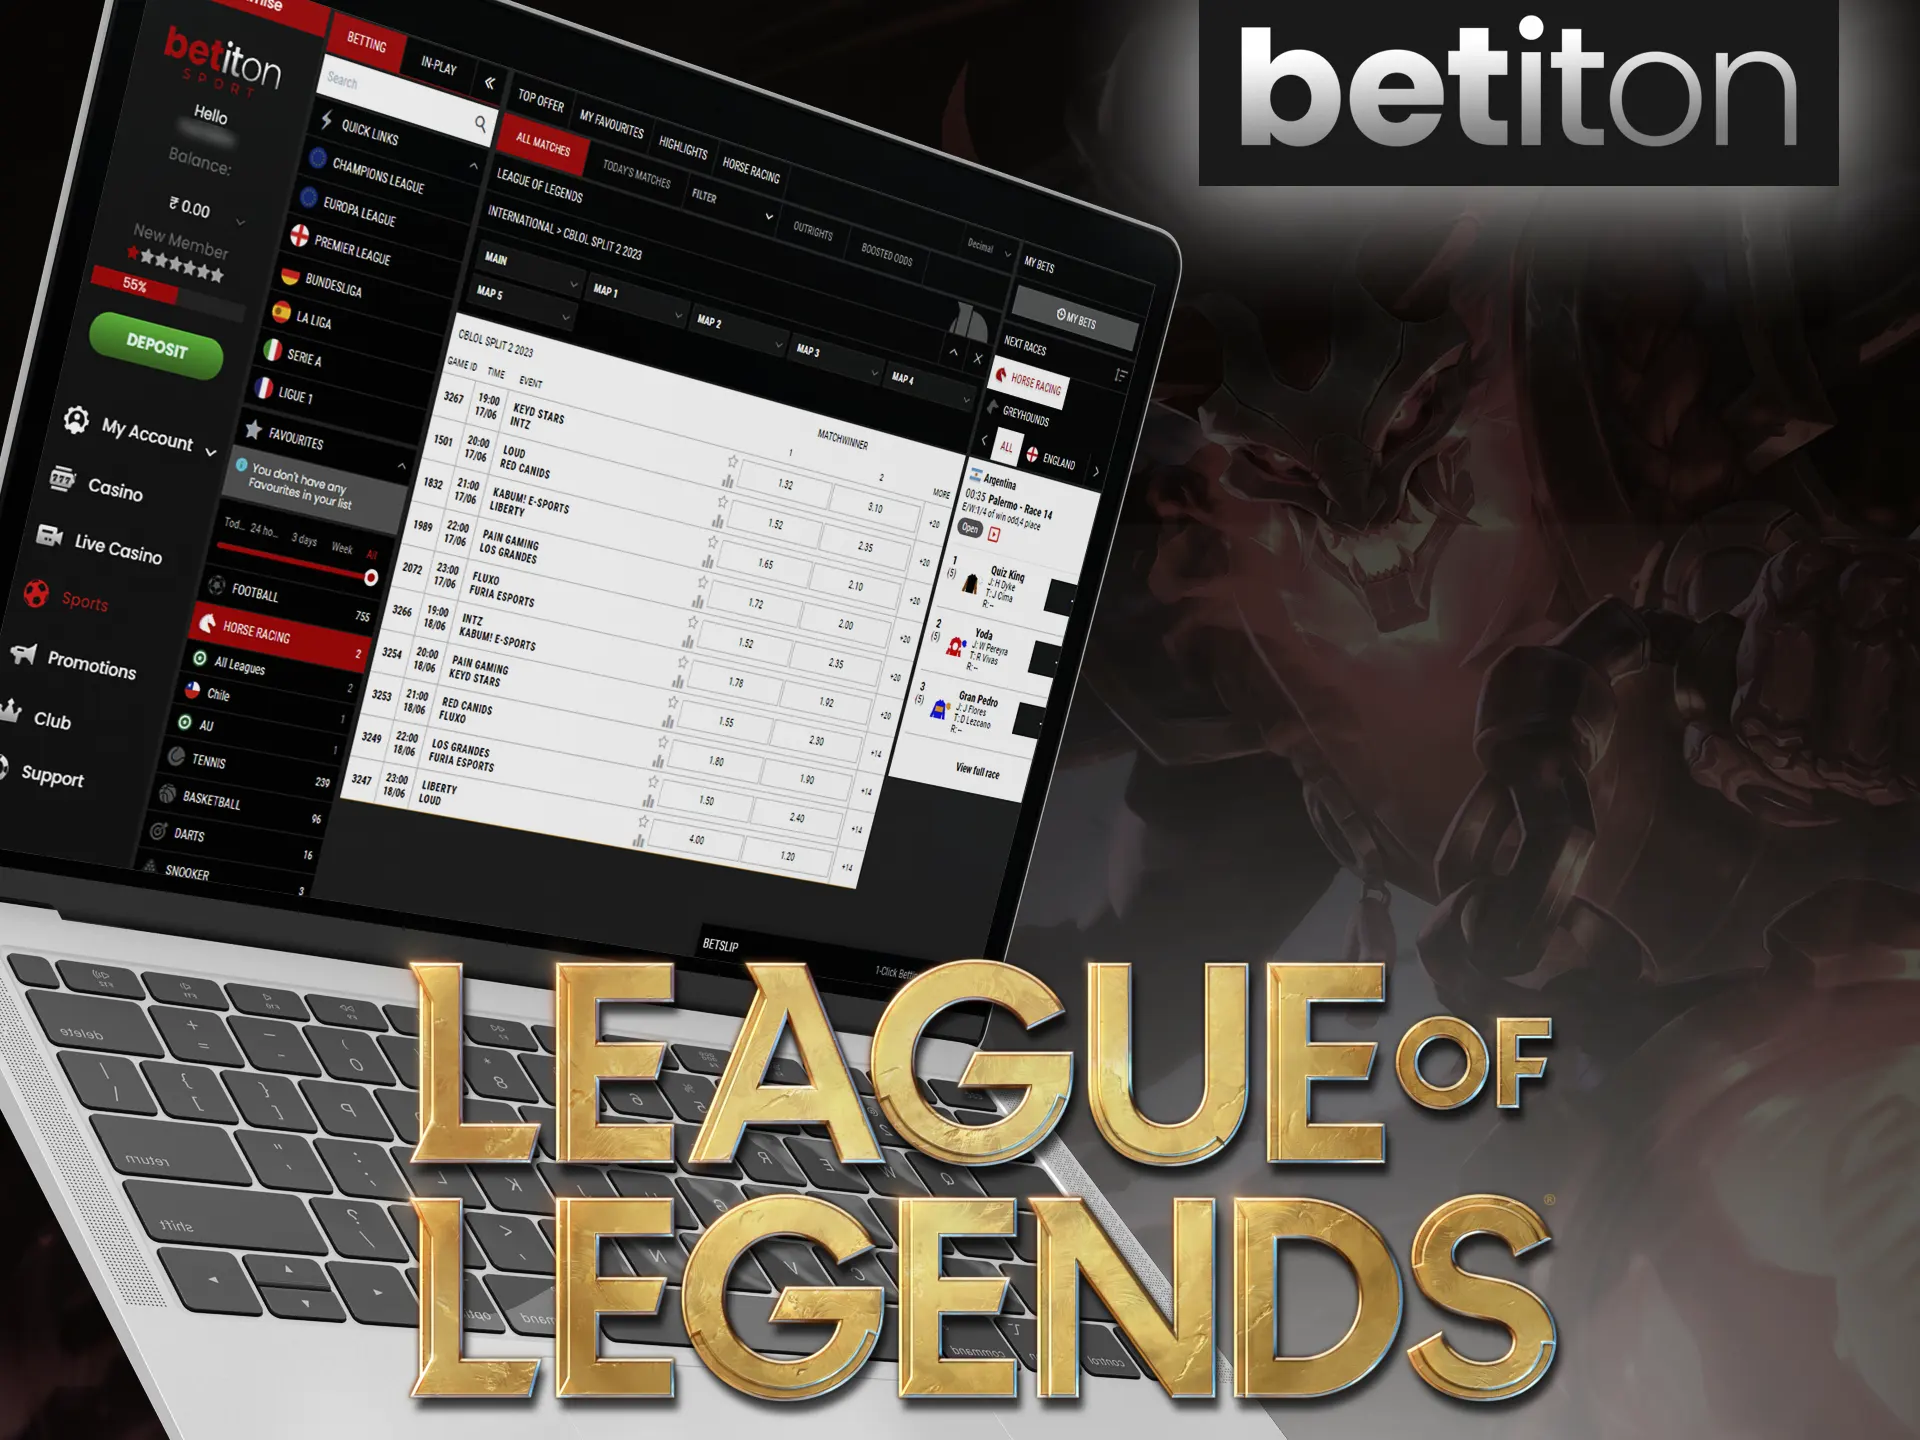 Watch and bet on League of Legends matches at the Betiton.